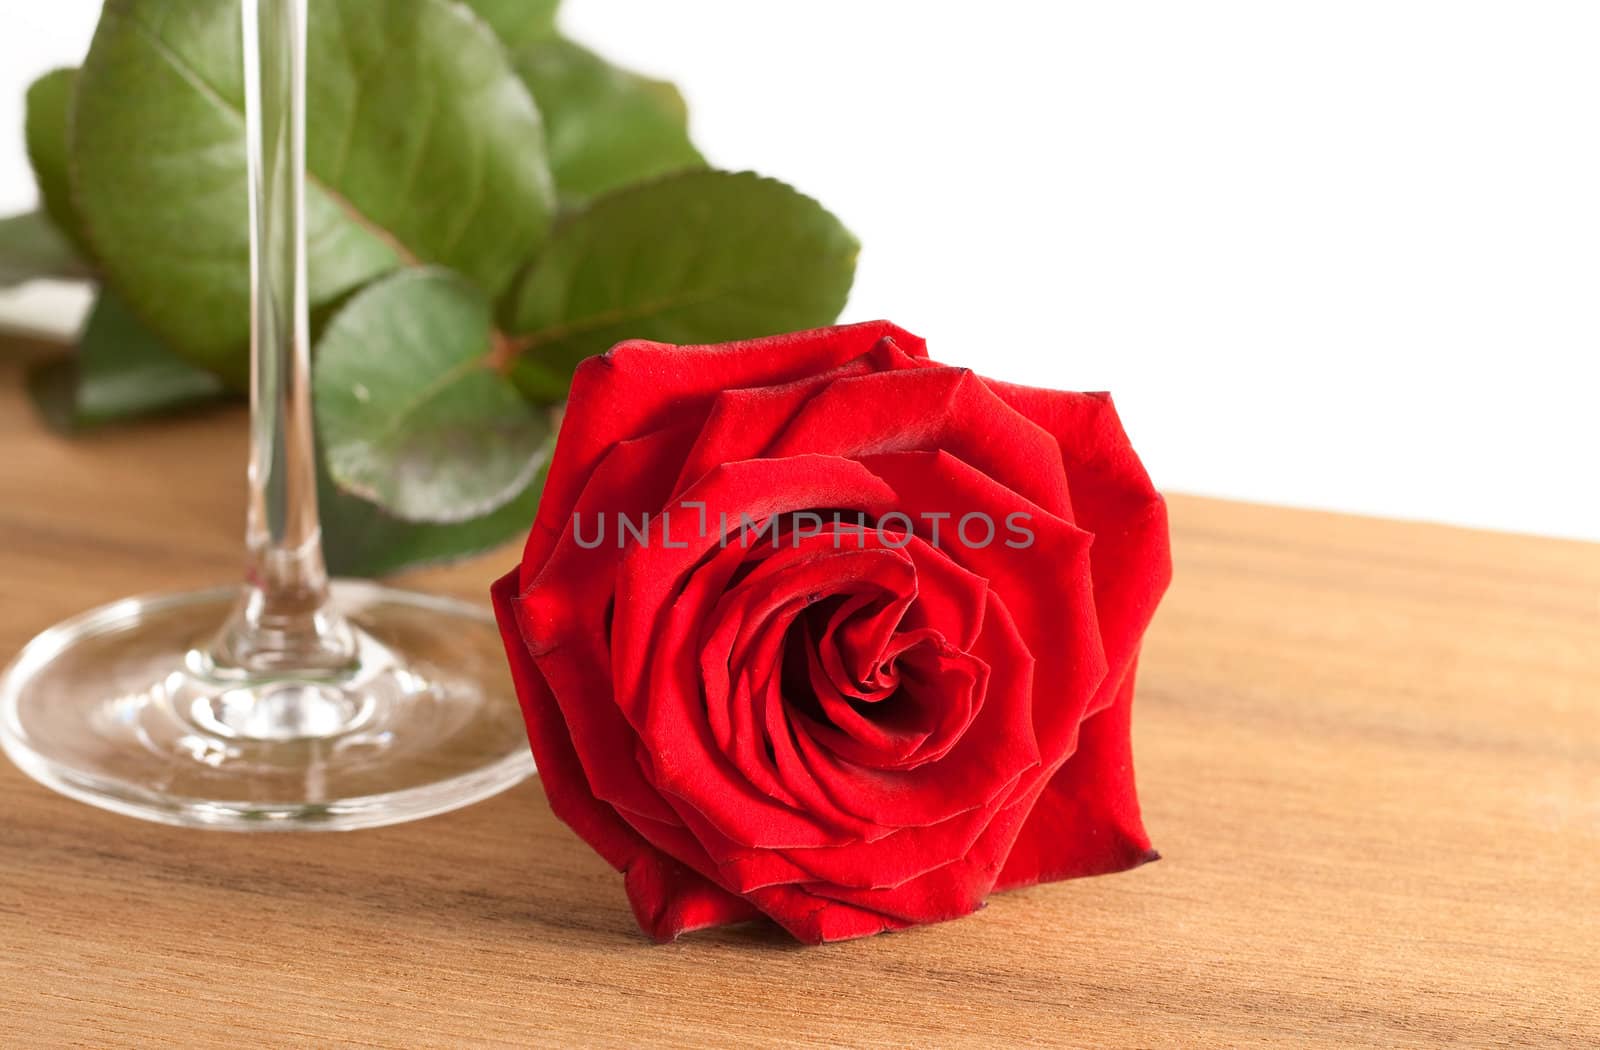 Red rose and wine glass by azschach